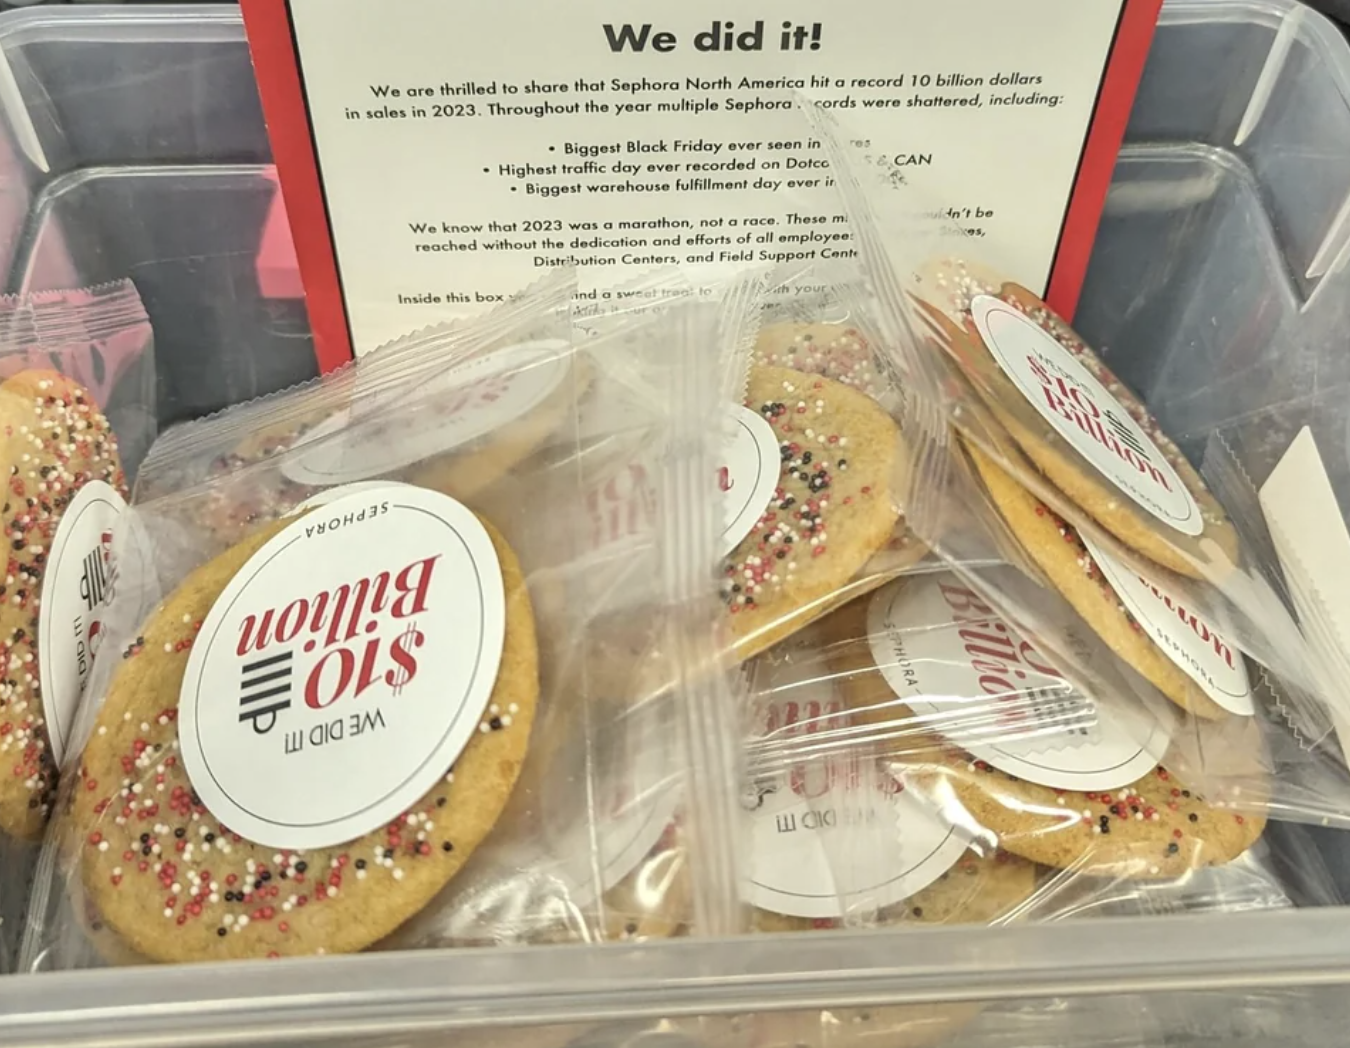 “Our reward for our company making 10 billion dollars last year. 20 cookies for an entire team at Sephora.”